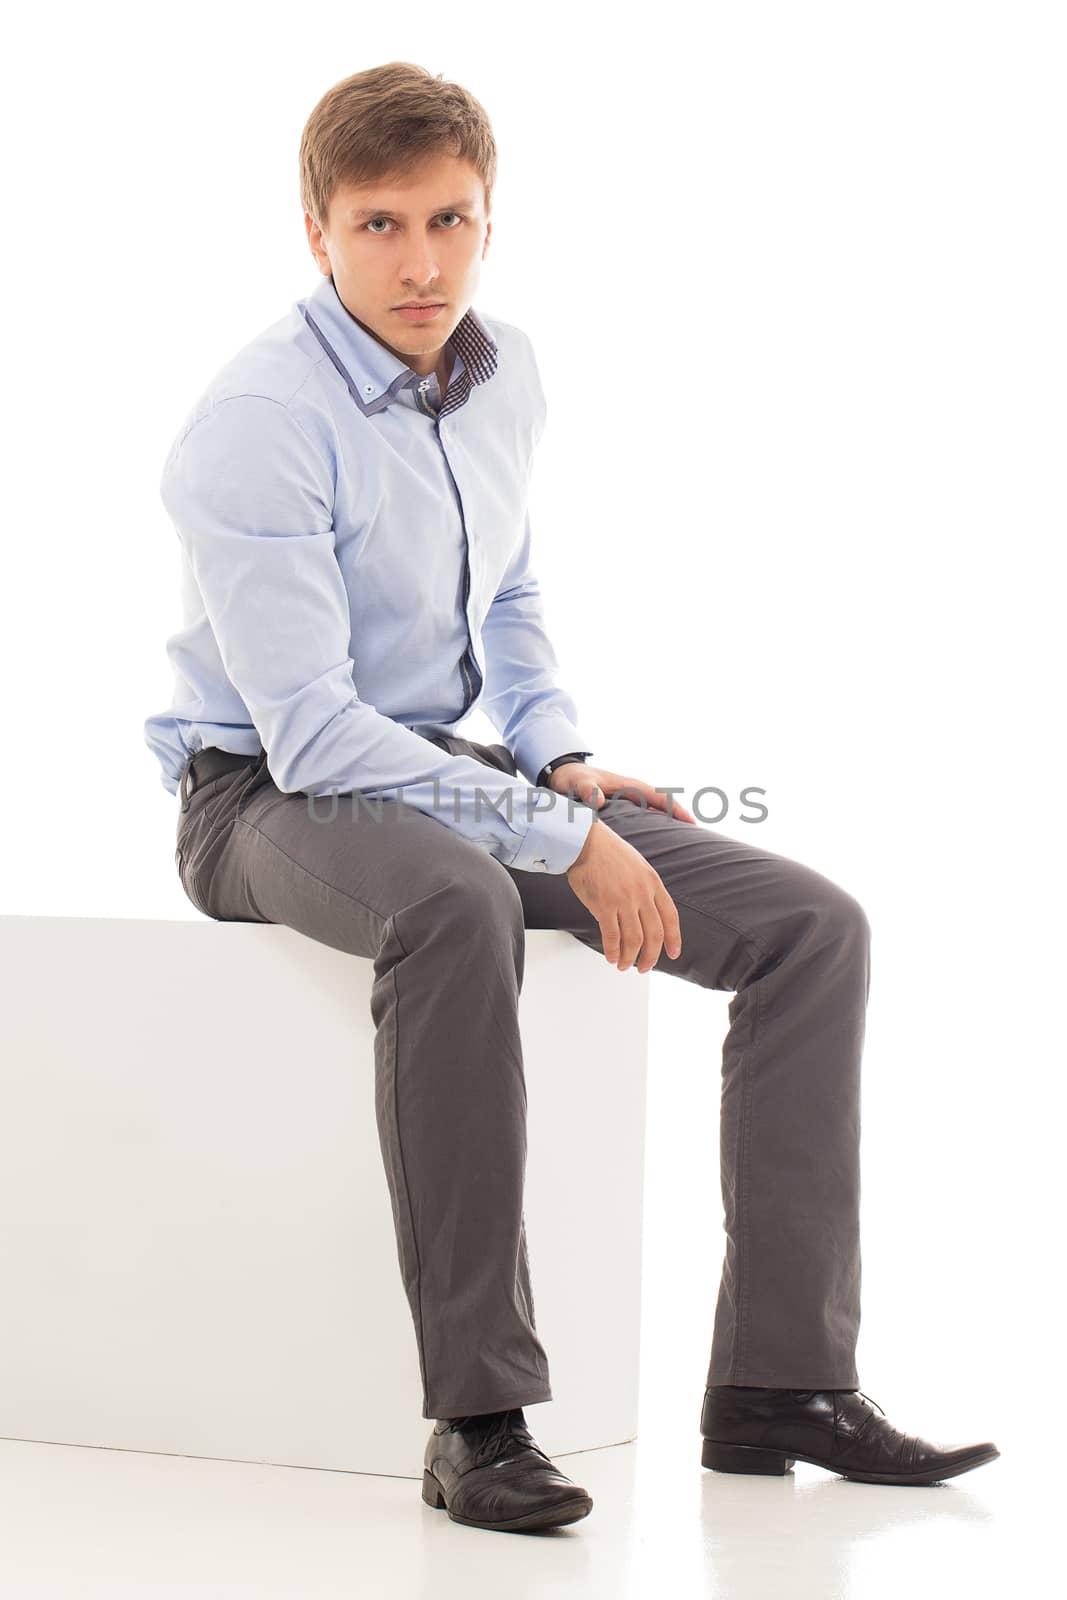 Handsome man in a shirt and trousers is sitting on a cube